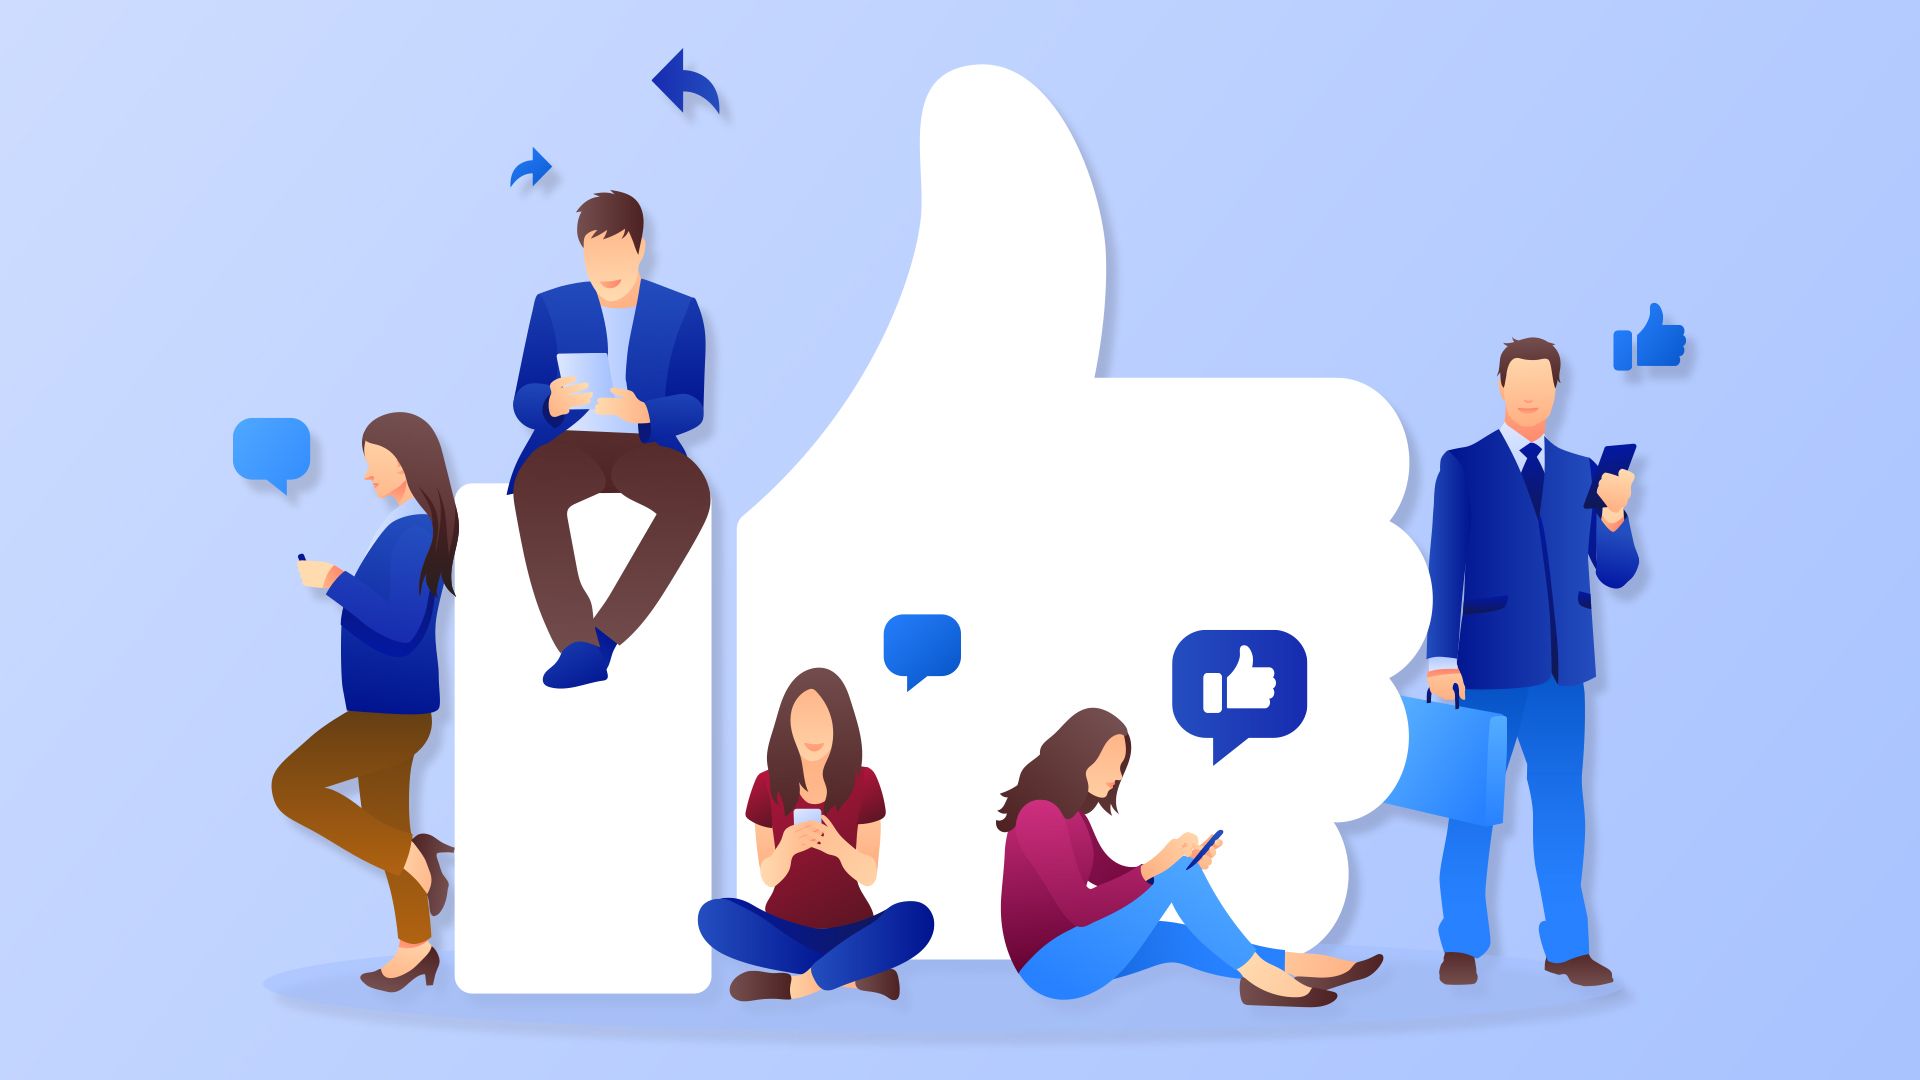 facebook marketing with influencers